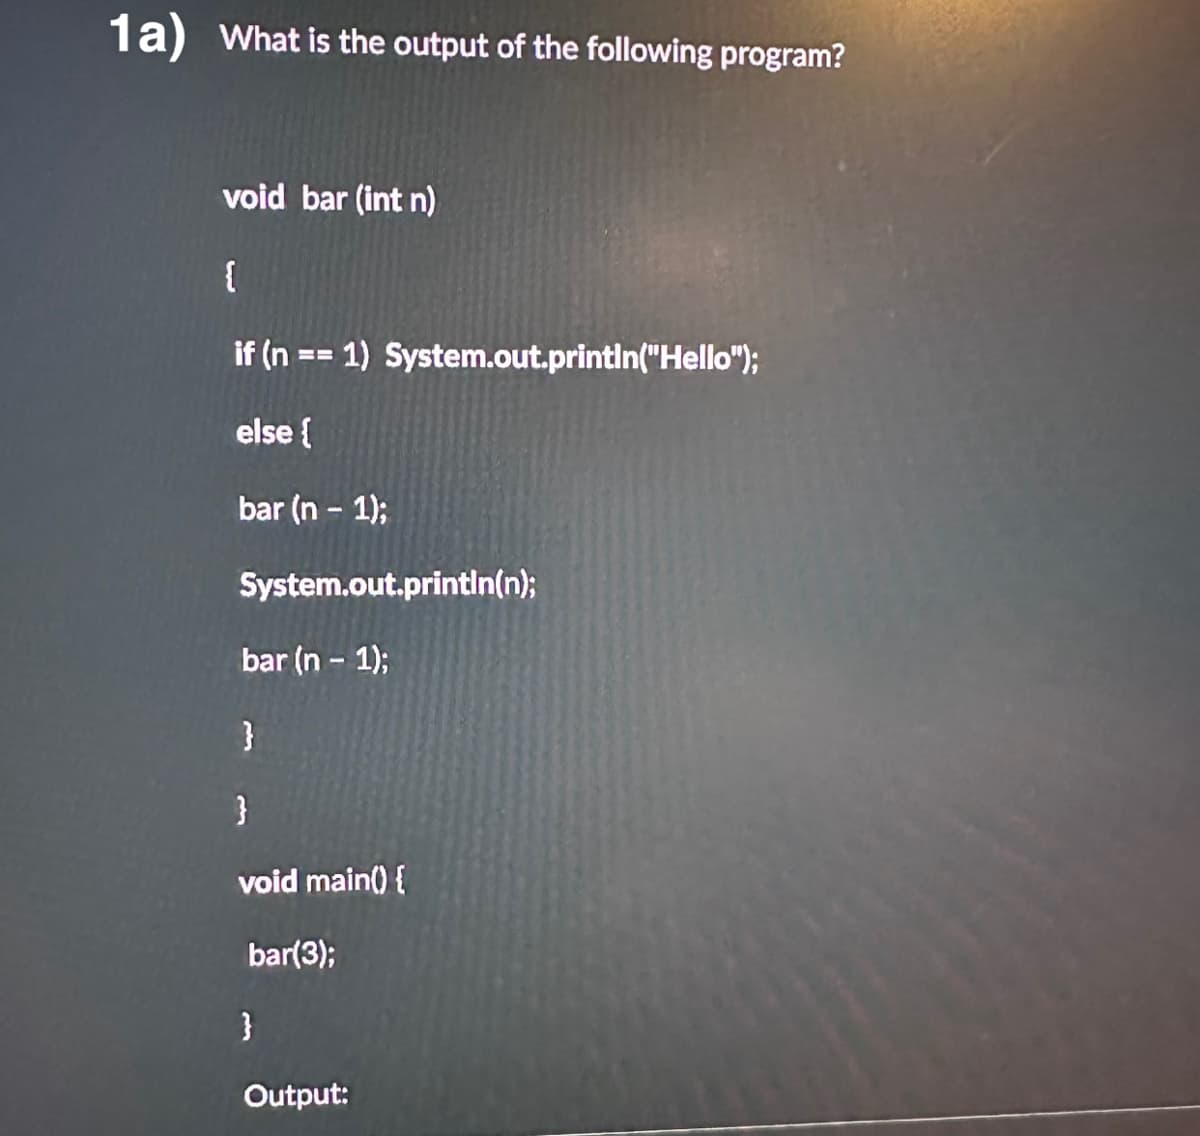 1a) What is the output of the following program?
void bar (int n)
{
if (n == 1) System.out.println("Hello");
else {
bar (n - 1);
System.out.println(n);
bar (n - 1);
}
}
void main() {
bar(3);
}
Output: